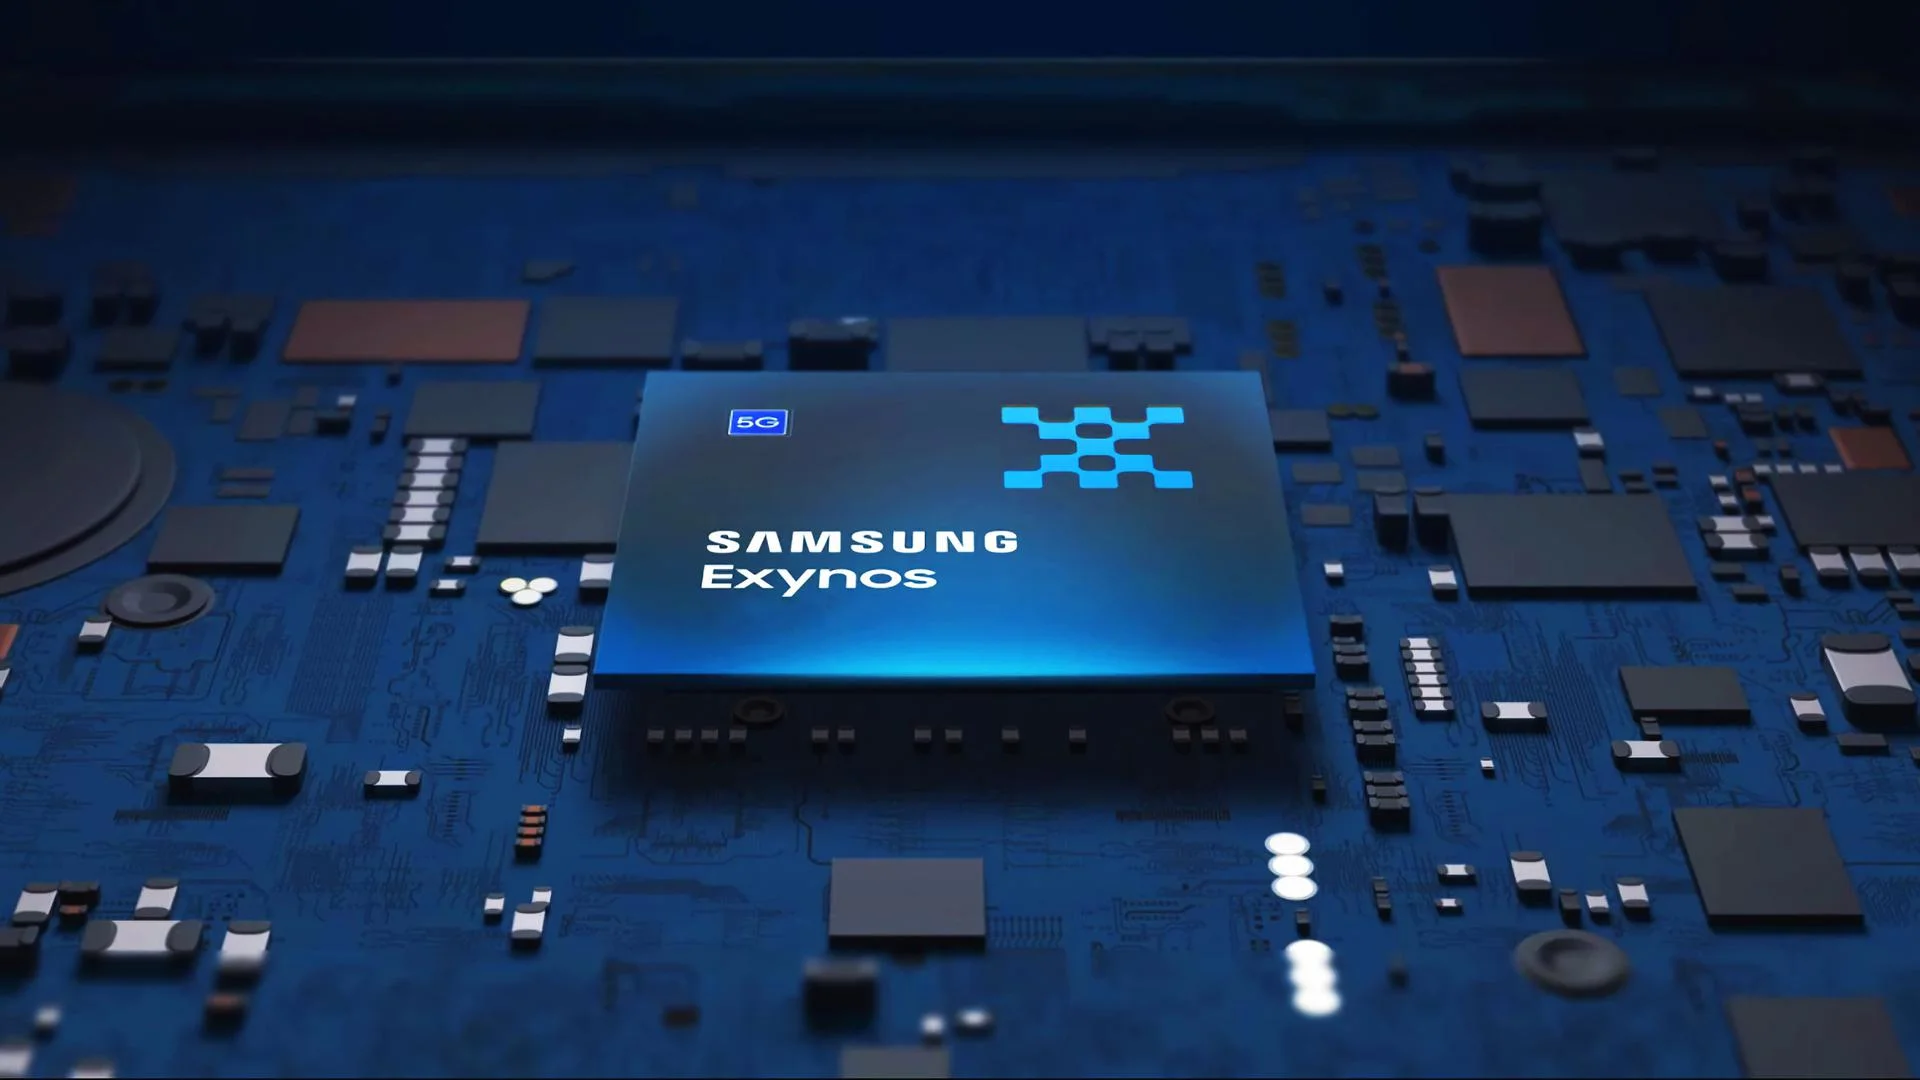 The network has information about the first 3-nm chipset for smartphones